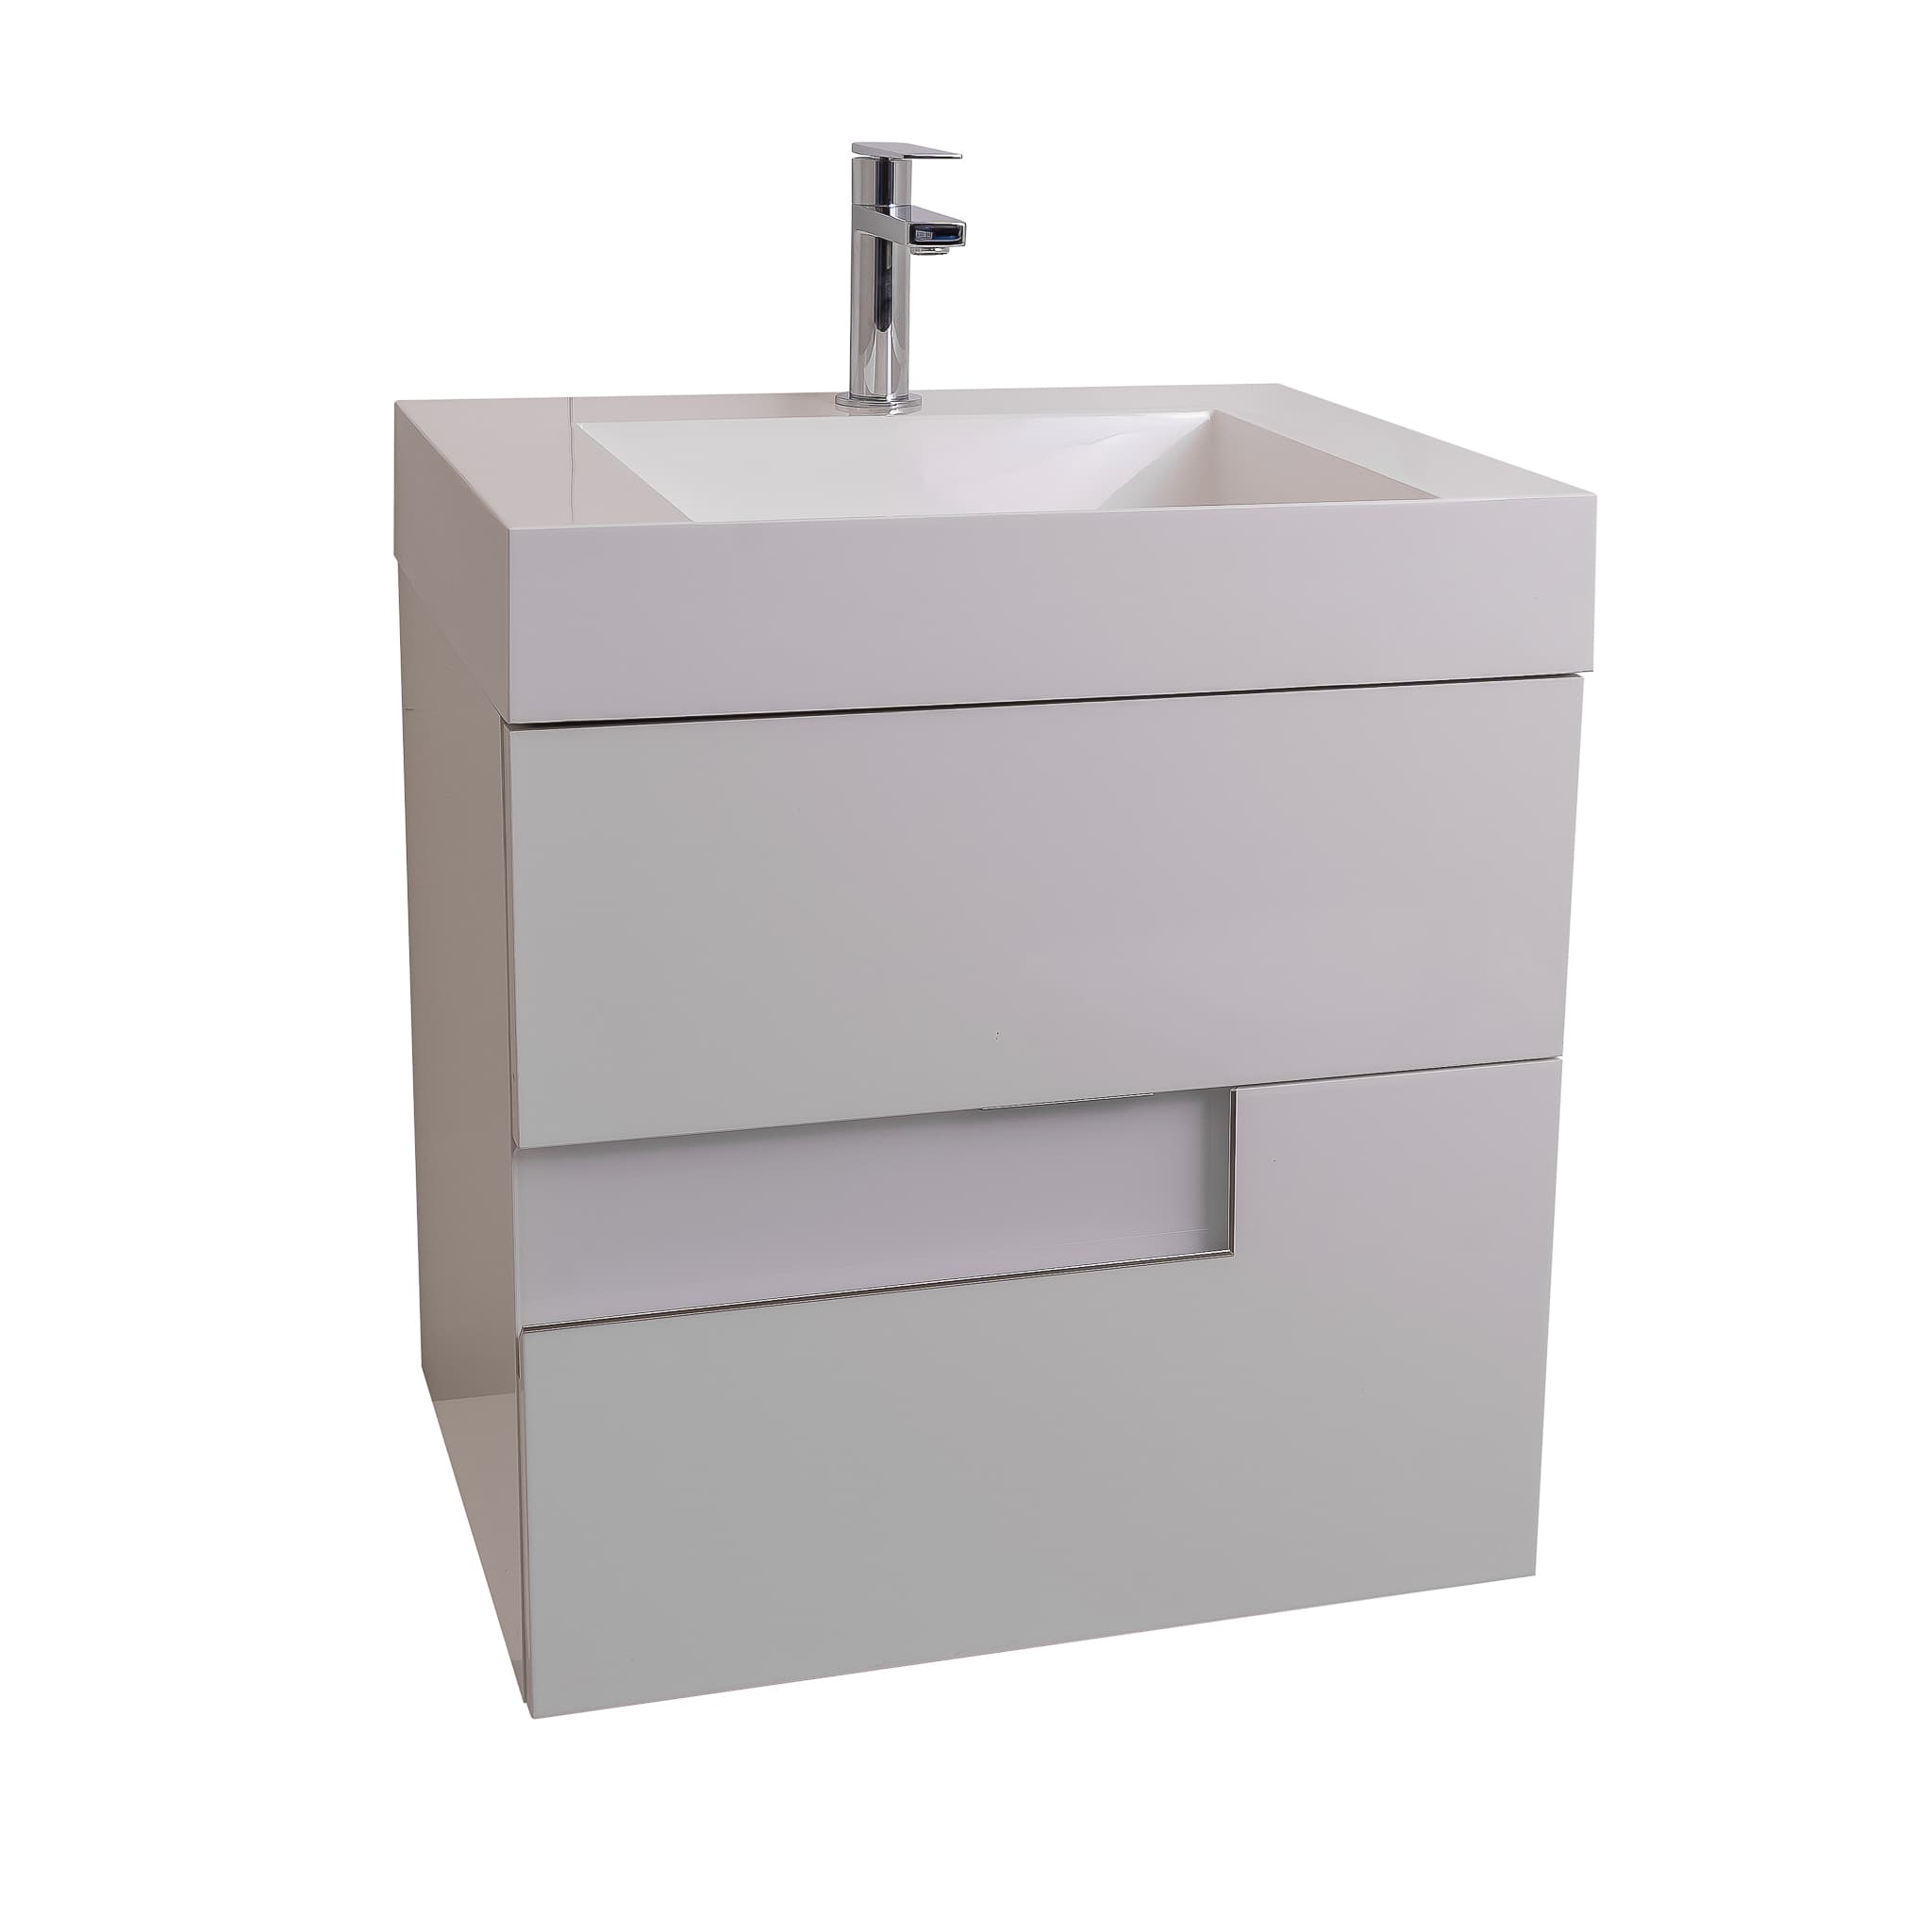 Vision 23.5 White High Gloss Cabinet, Infinity Cultured Marble Sink, Wall Mounted Modern Vanity Set